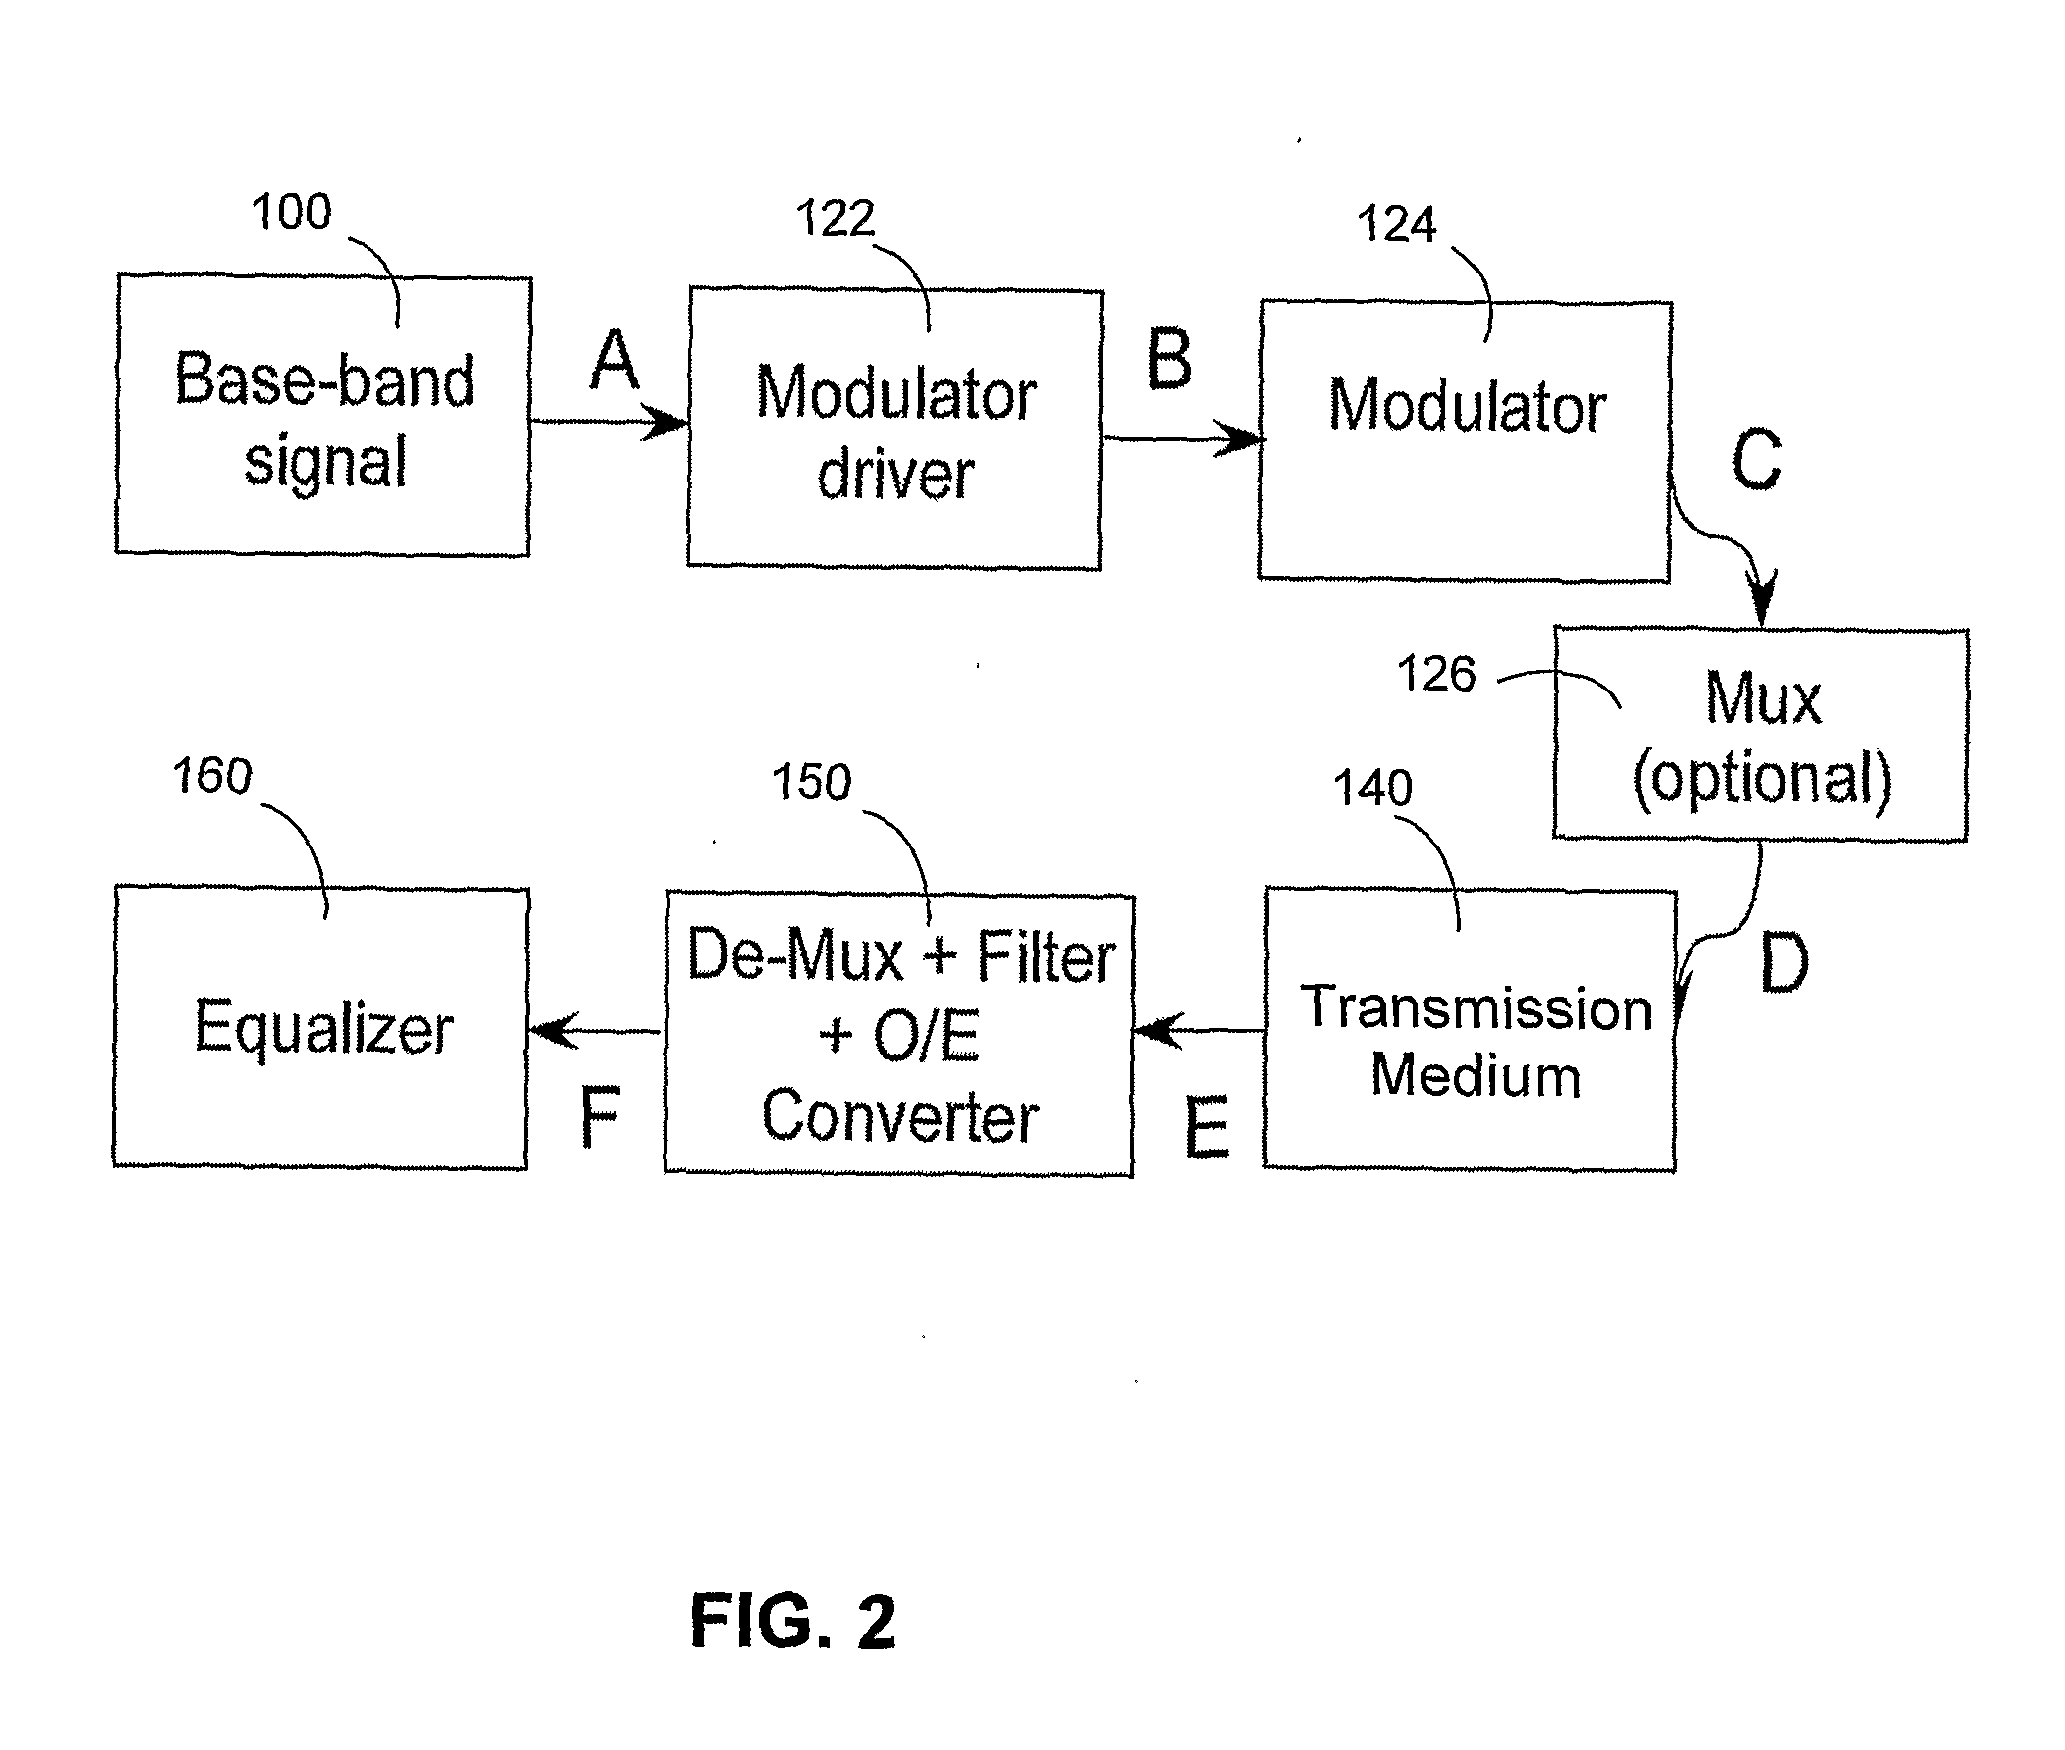 System and Method For Increasing Spectral Efficiency, Capacity and/or Dispersion-Limited Reach of Modulated Signals in Communication Links